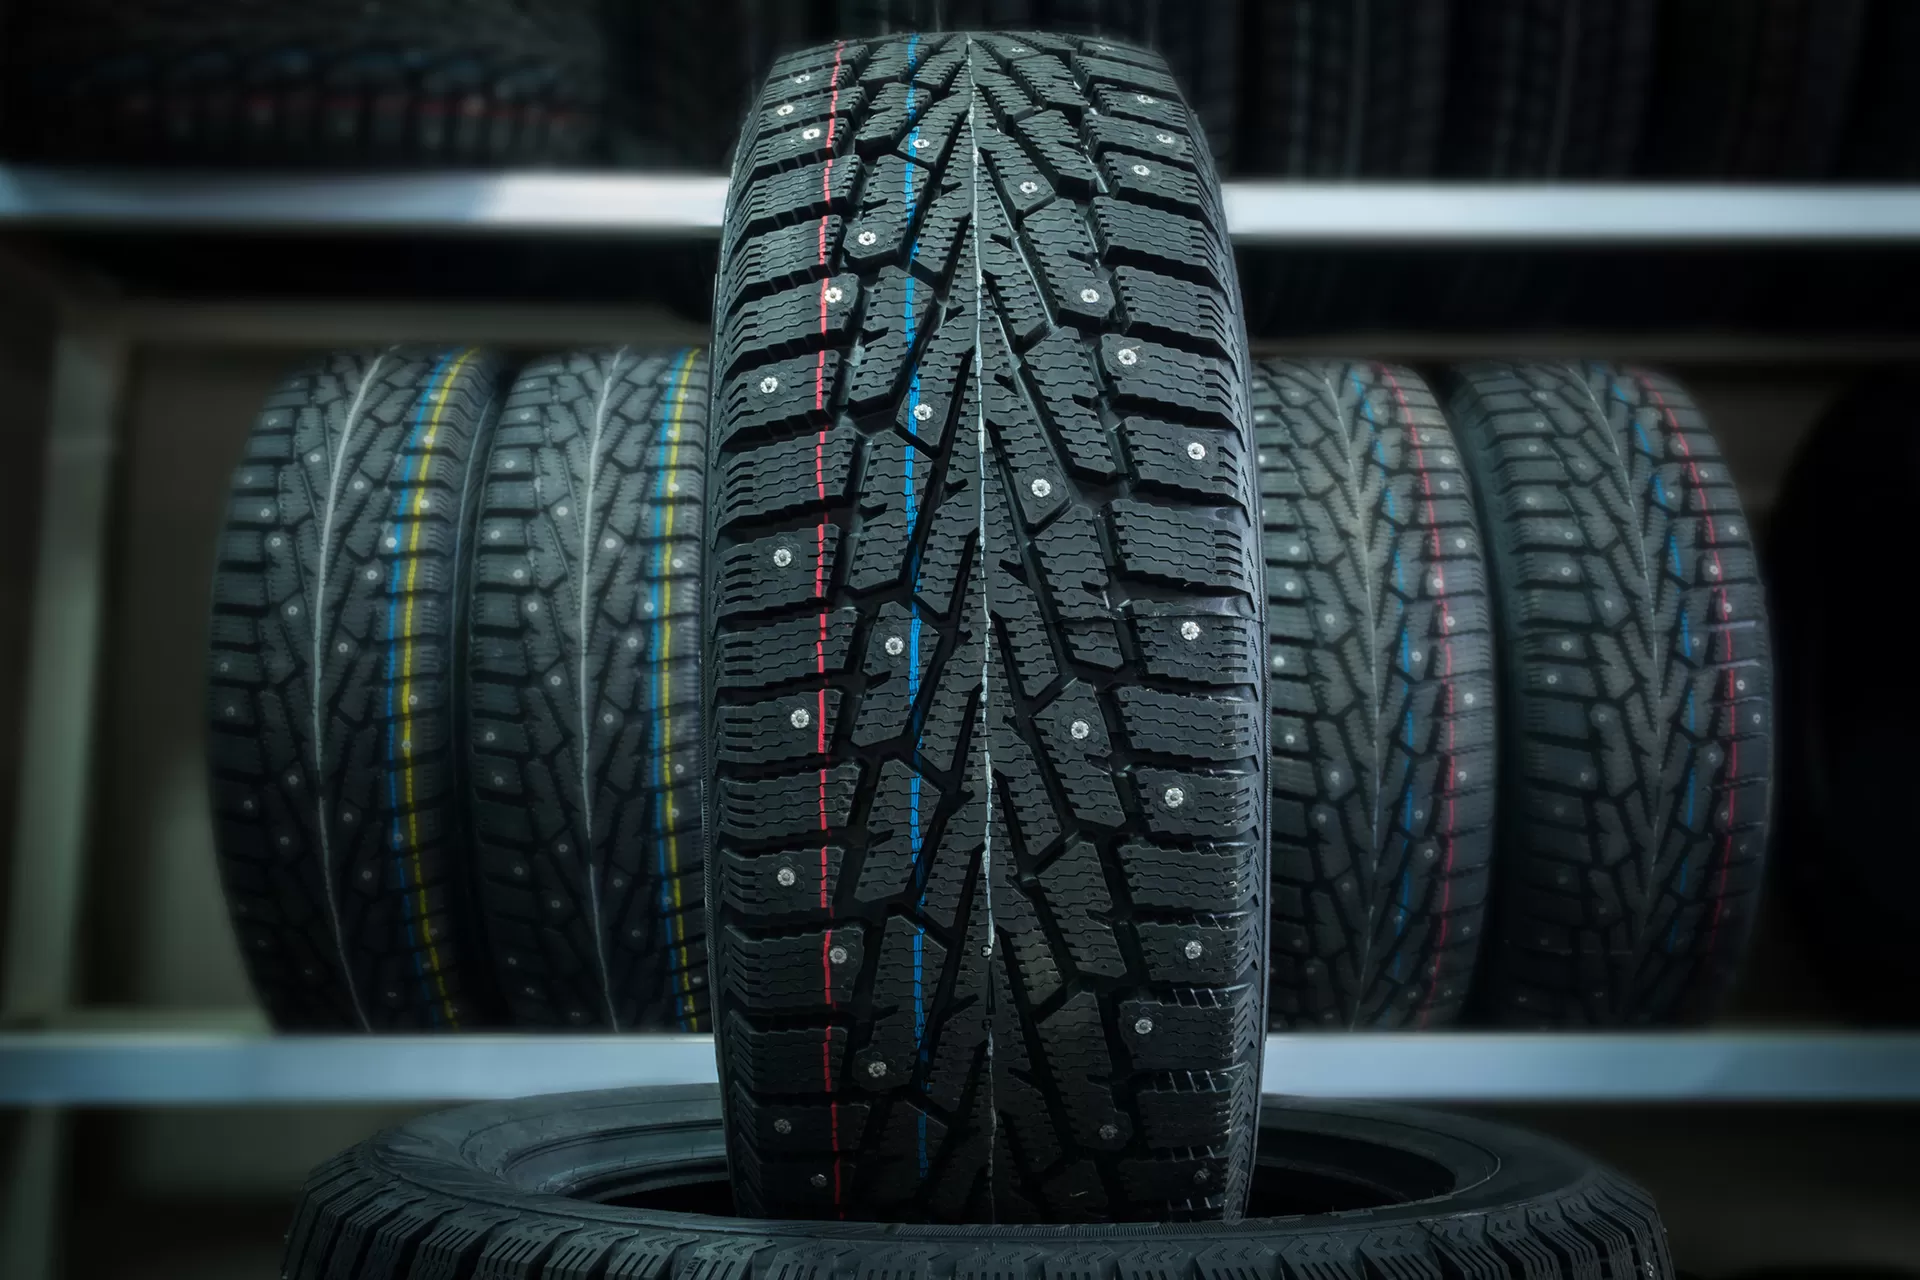 Improved the process efficiency with IoT based solution for a leading tyre manufacturer